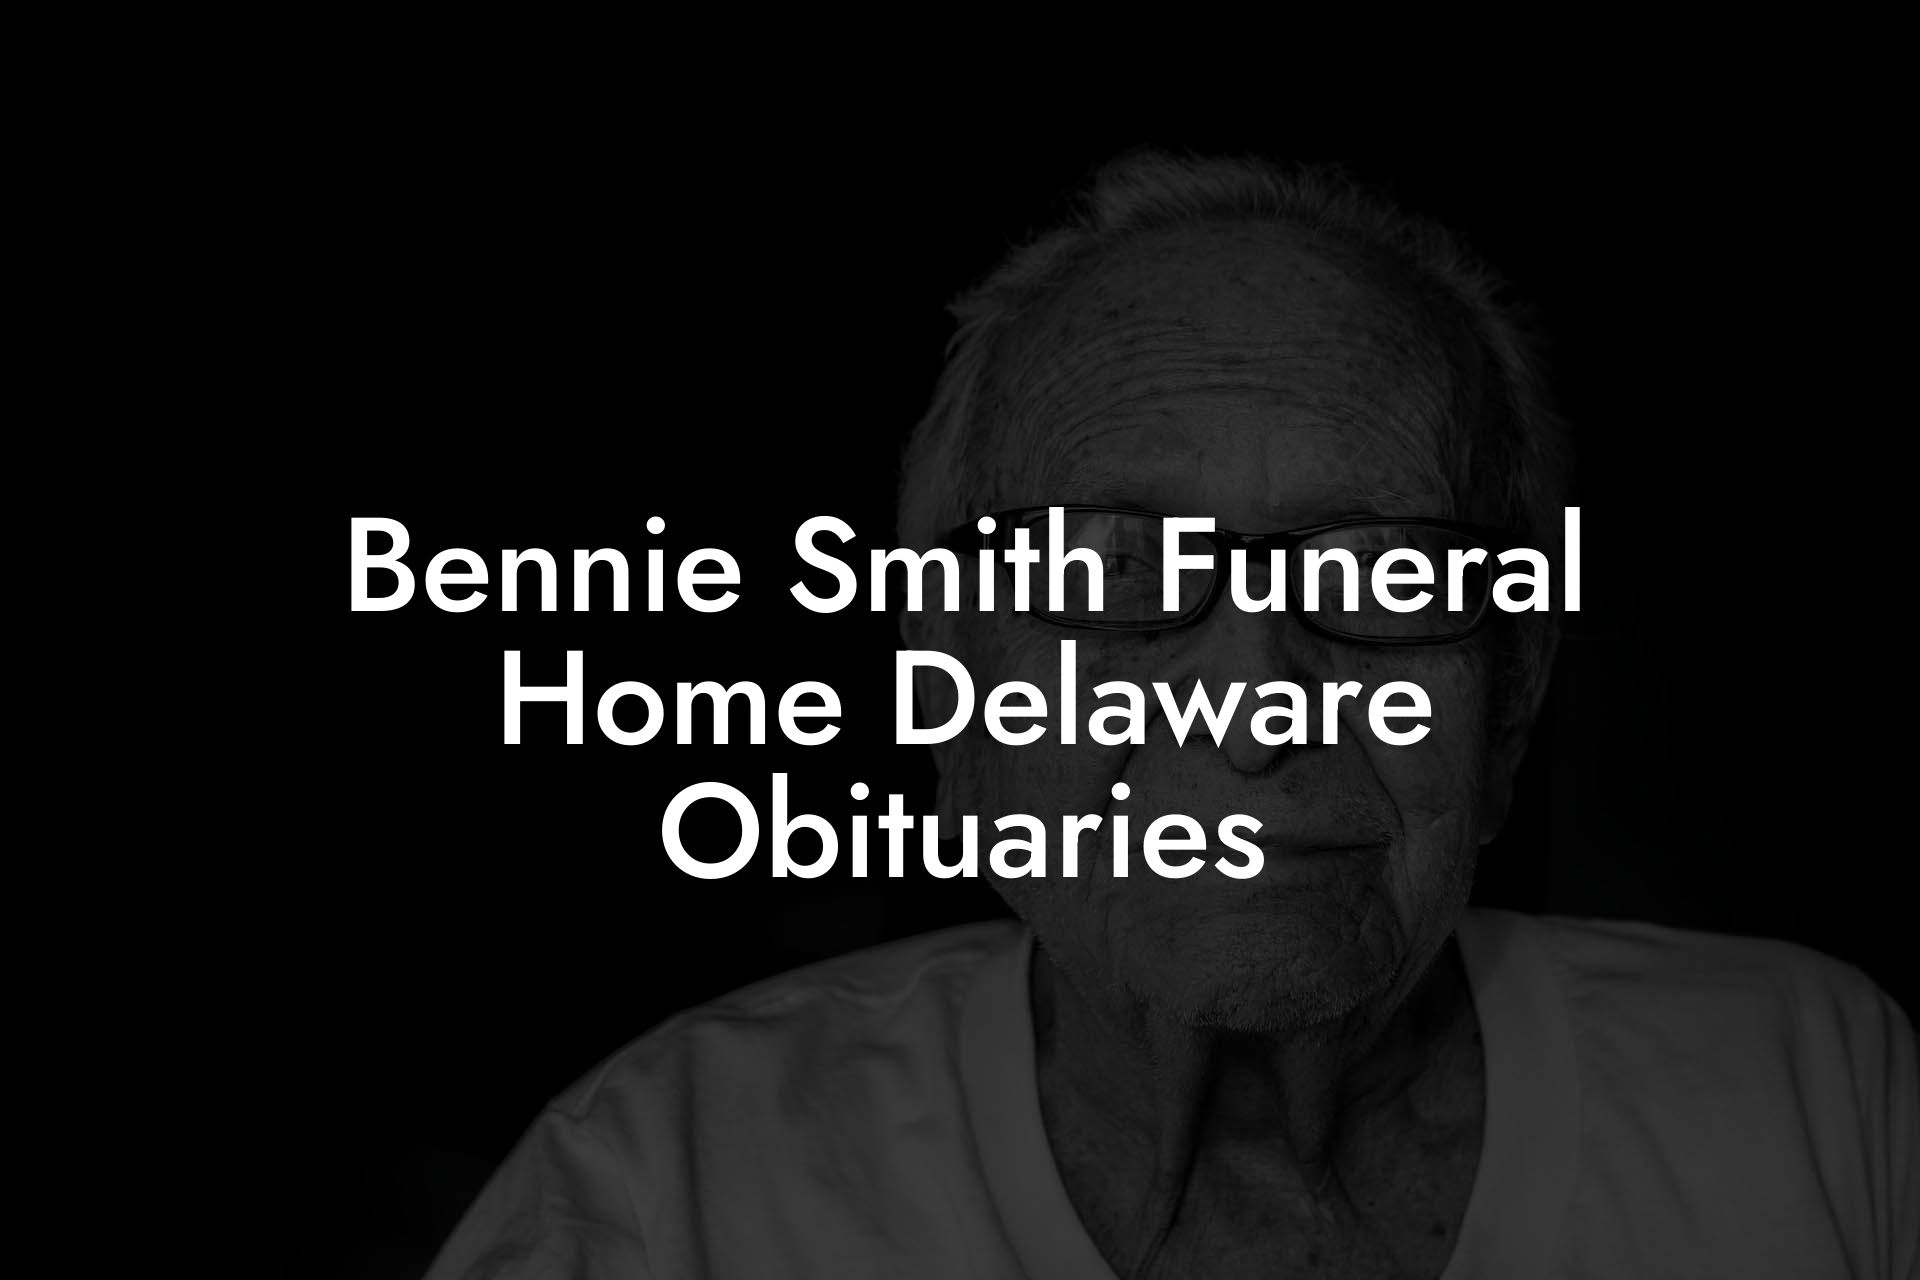 Bennie Smith Funeral Home Delaware Obituaries